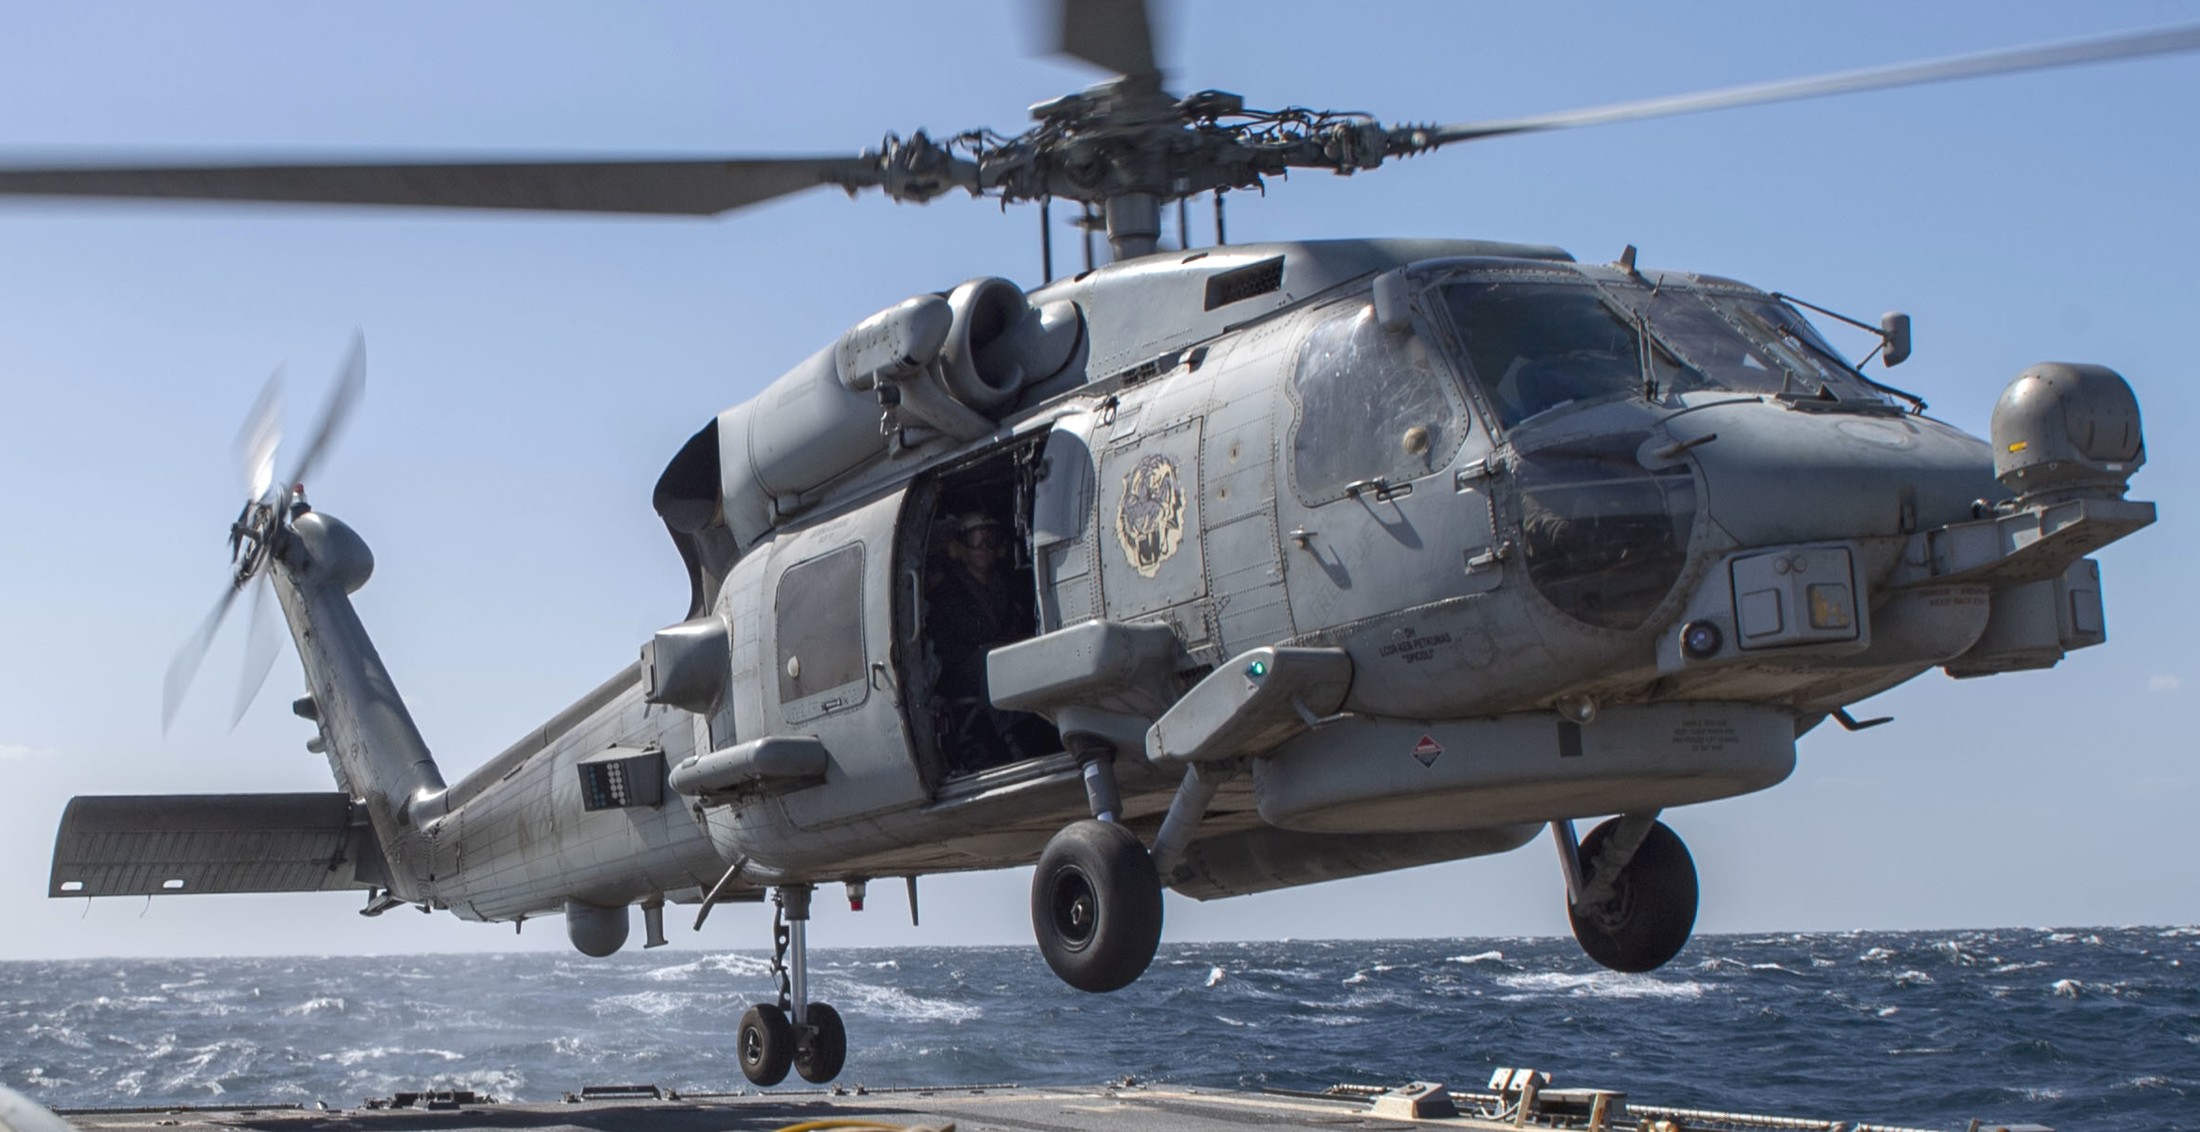 hsm-73 battlecats helicopter maritime strike squadron us navy mh-60r seahawk 2013 55 uss freedom lcs-1